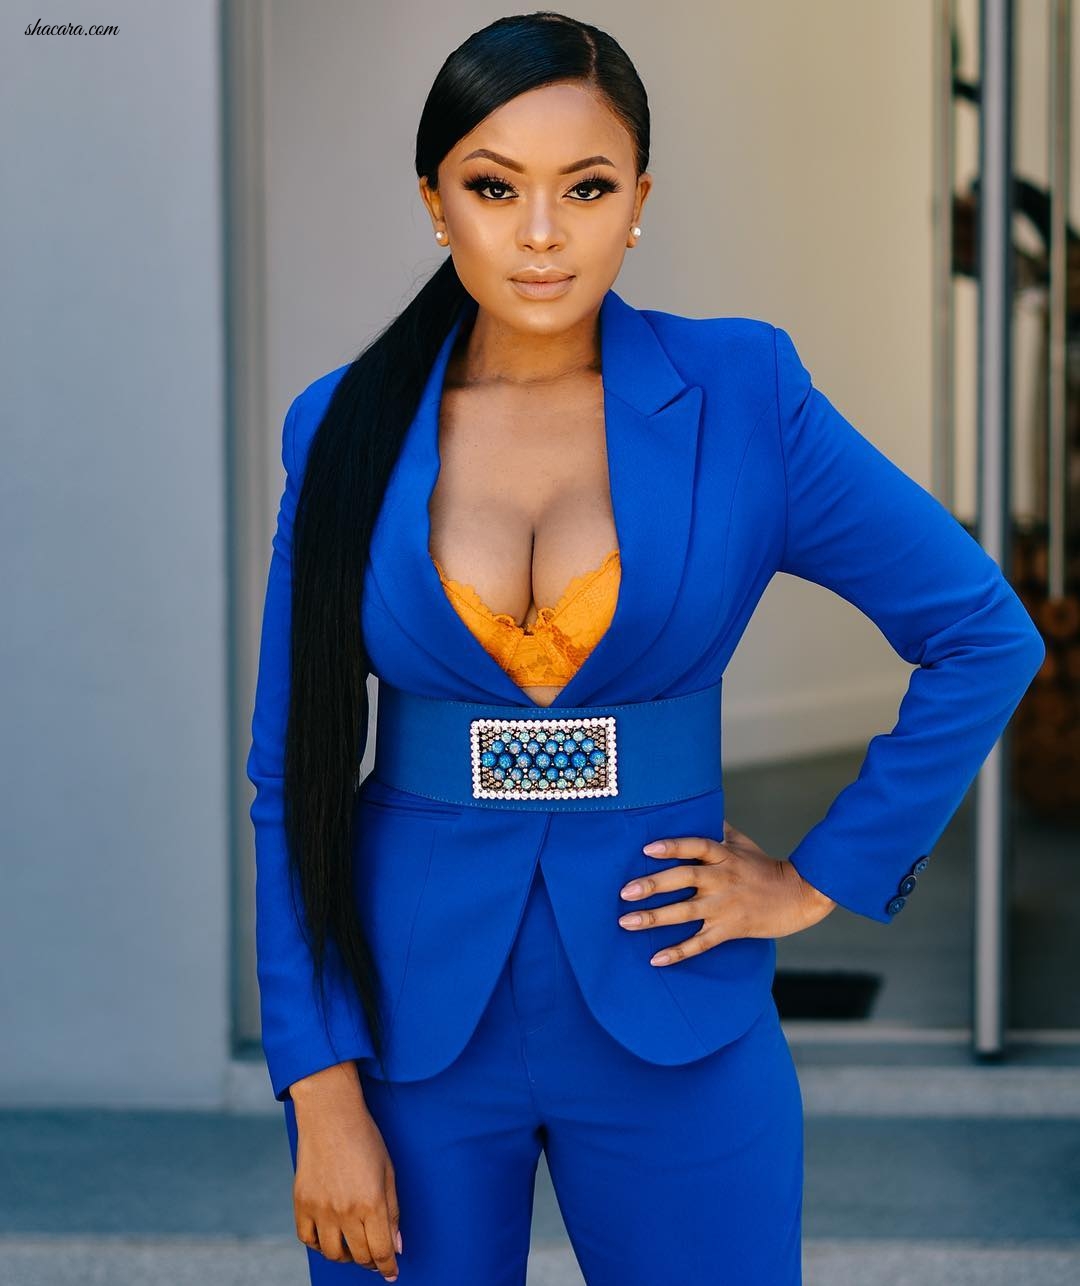 South Africa’s Lerato Kganyago Is Easily Owning 2019 With These Tremendous Fashion looks